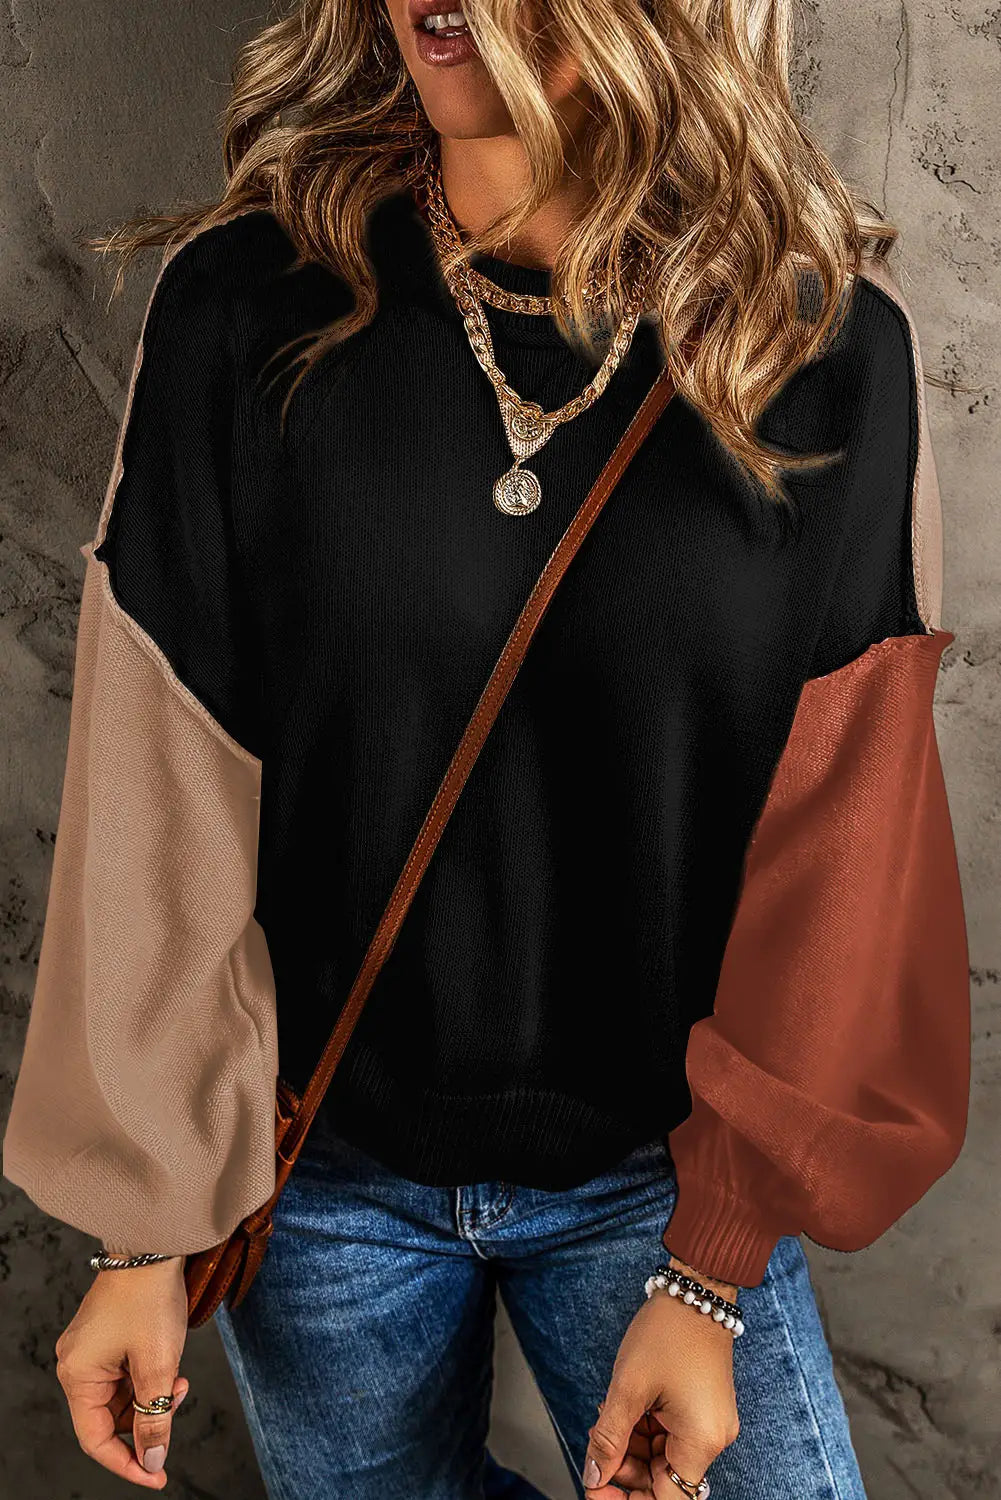 Chicory coffee color block exposed seam loose fit sweater - black / s / 55% acrylic + 45% cotton - tops